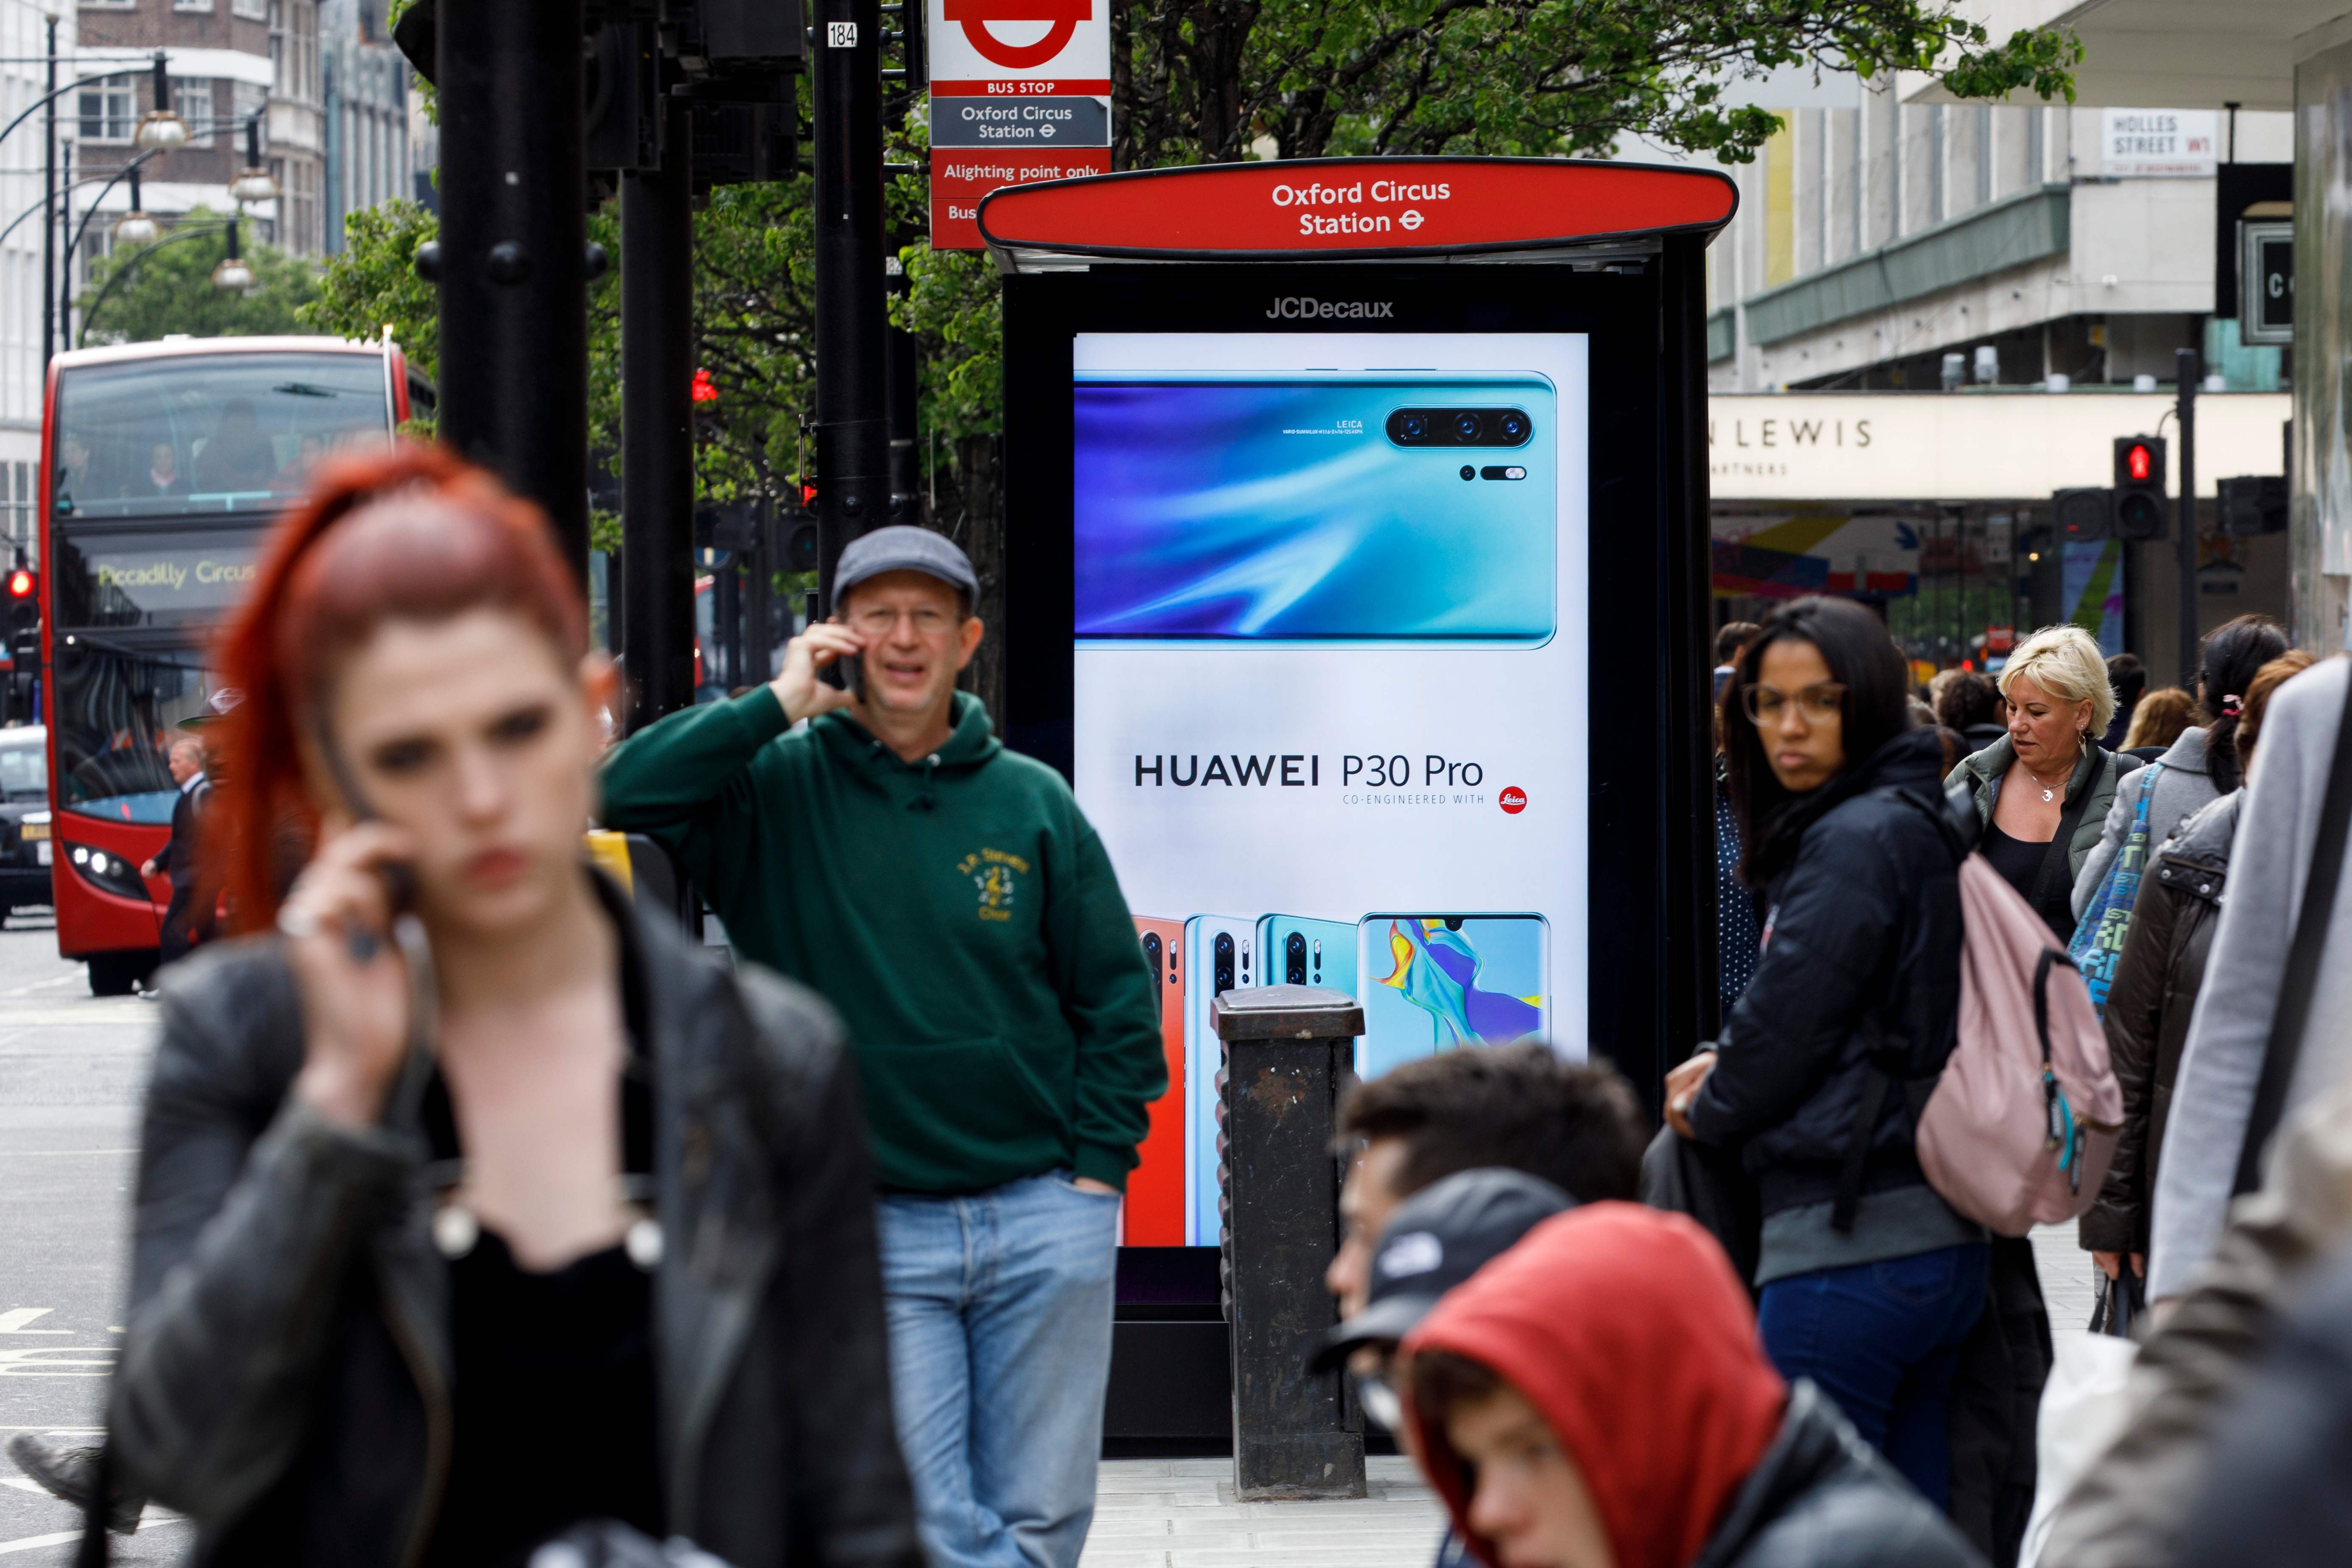 Pedestrians on their mobile phones near a Huawei advertisement at a bus stop in central London in April. Photo: AFP